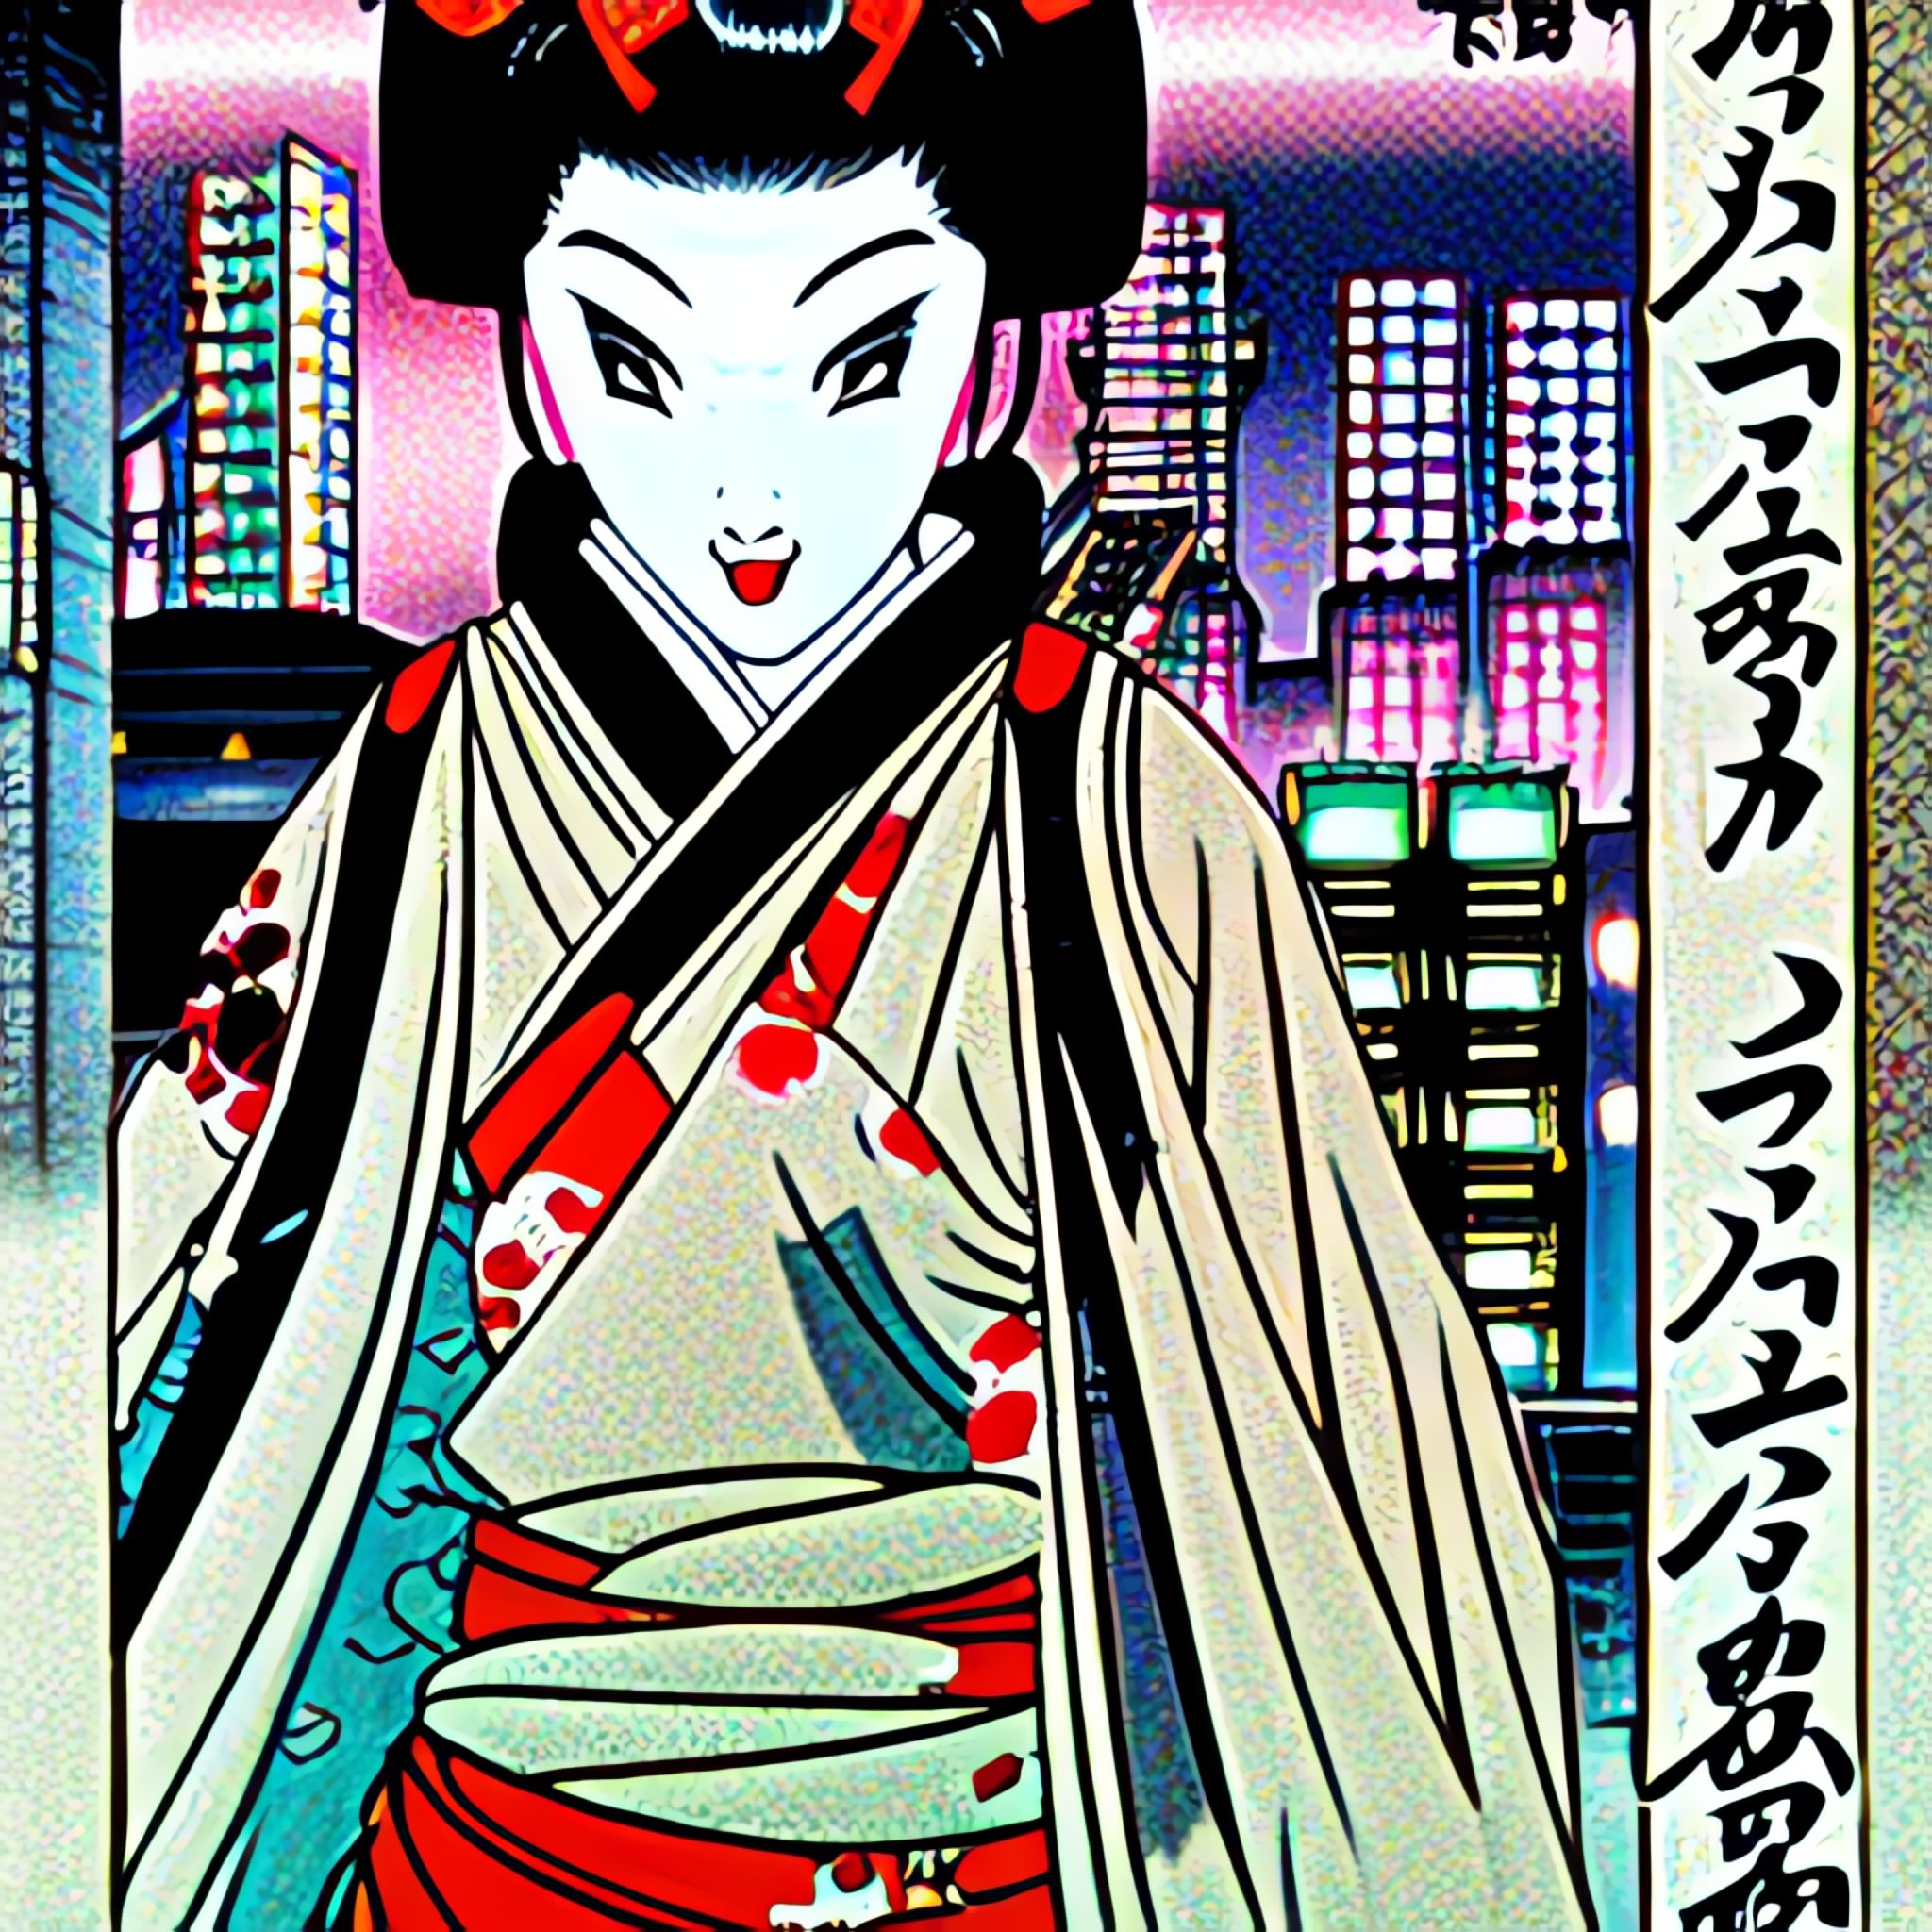 Geisha-in-the-middle-of-the-frame-Neo-Tokyo-lots-of-details-Go-Nagai-x8dx